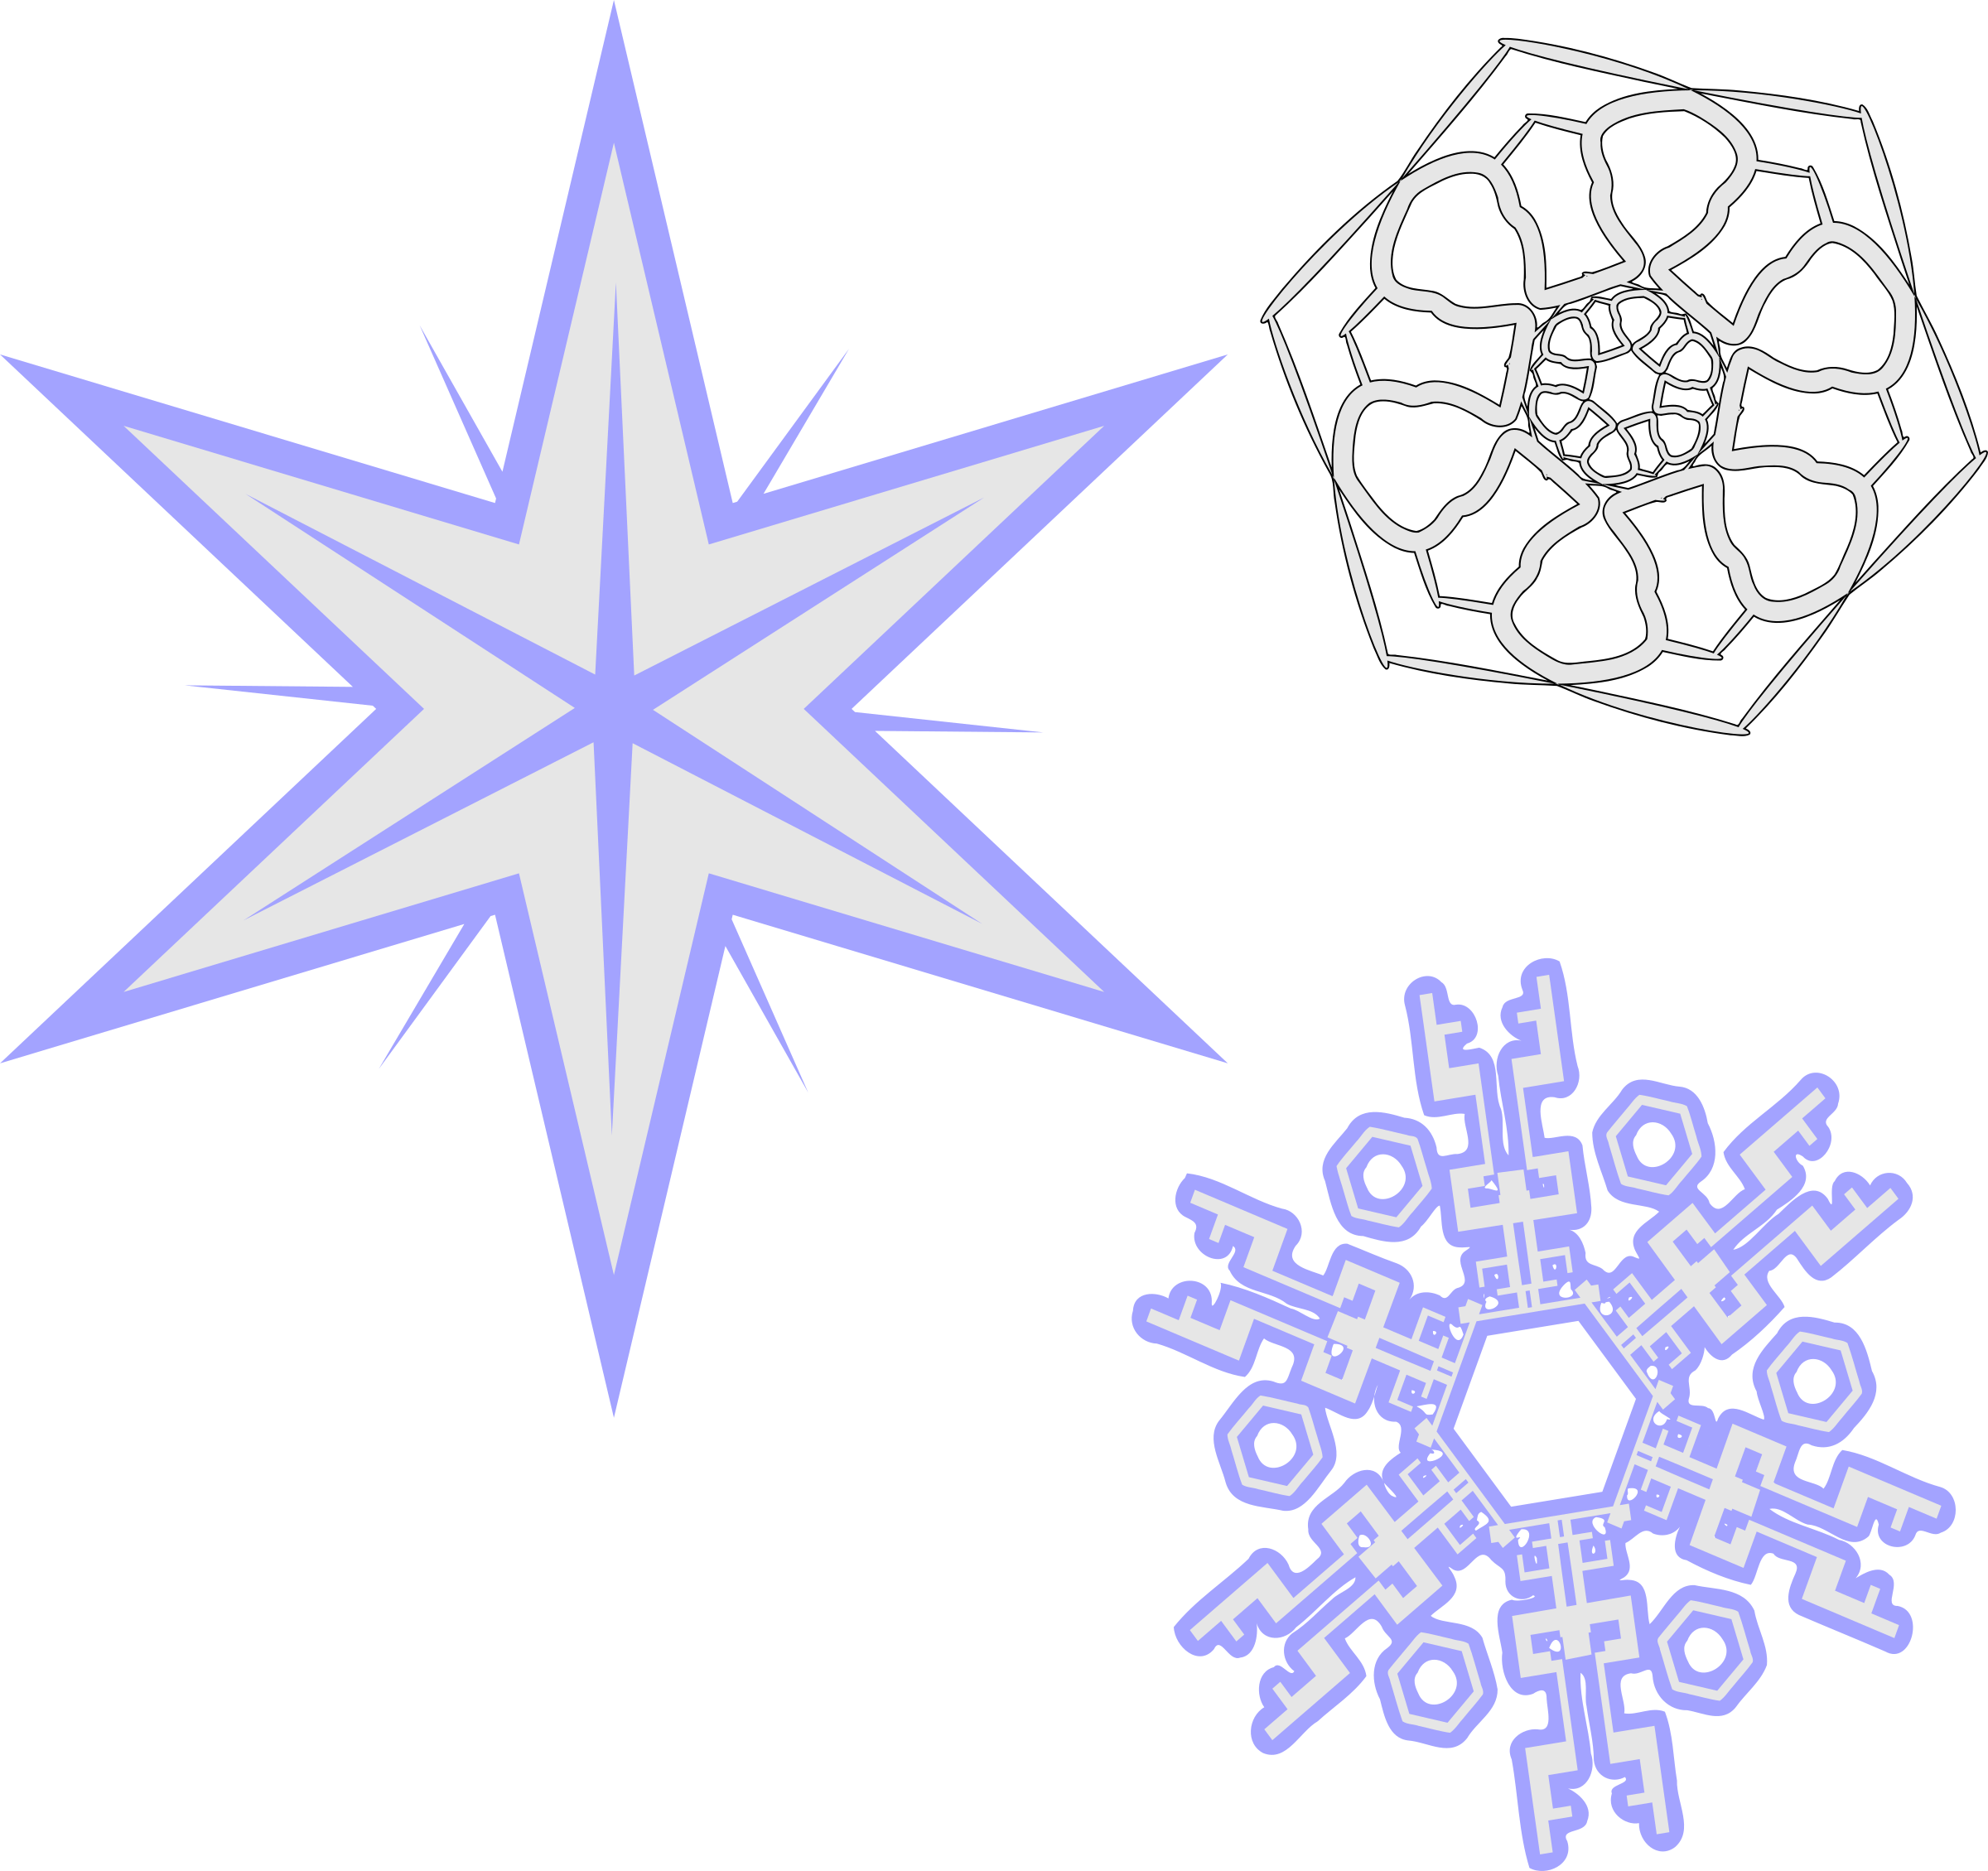 clipart snowflake group